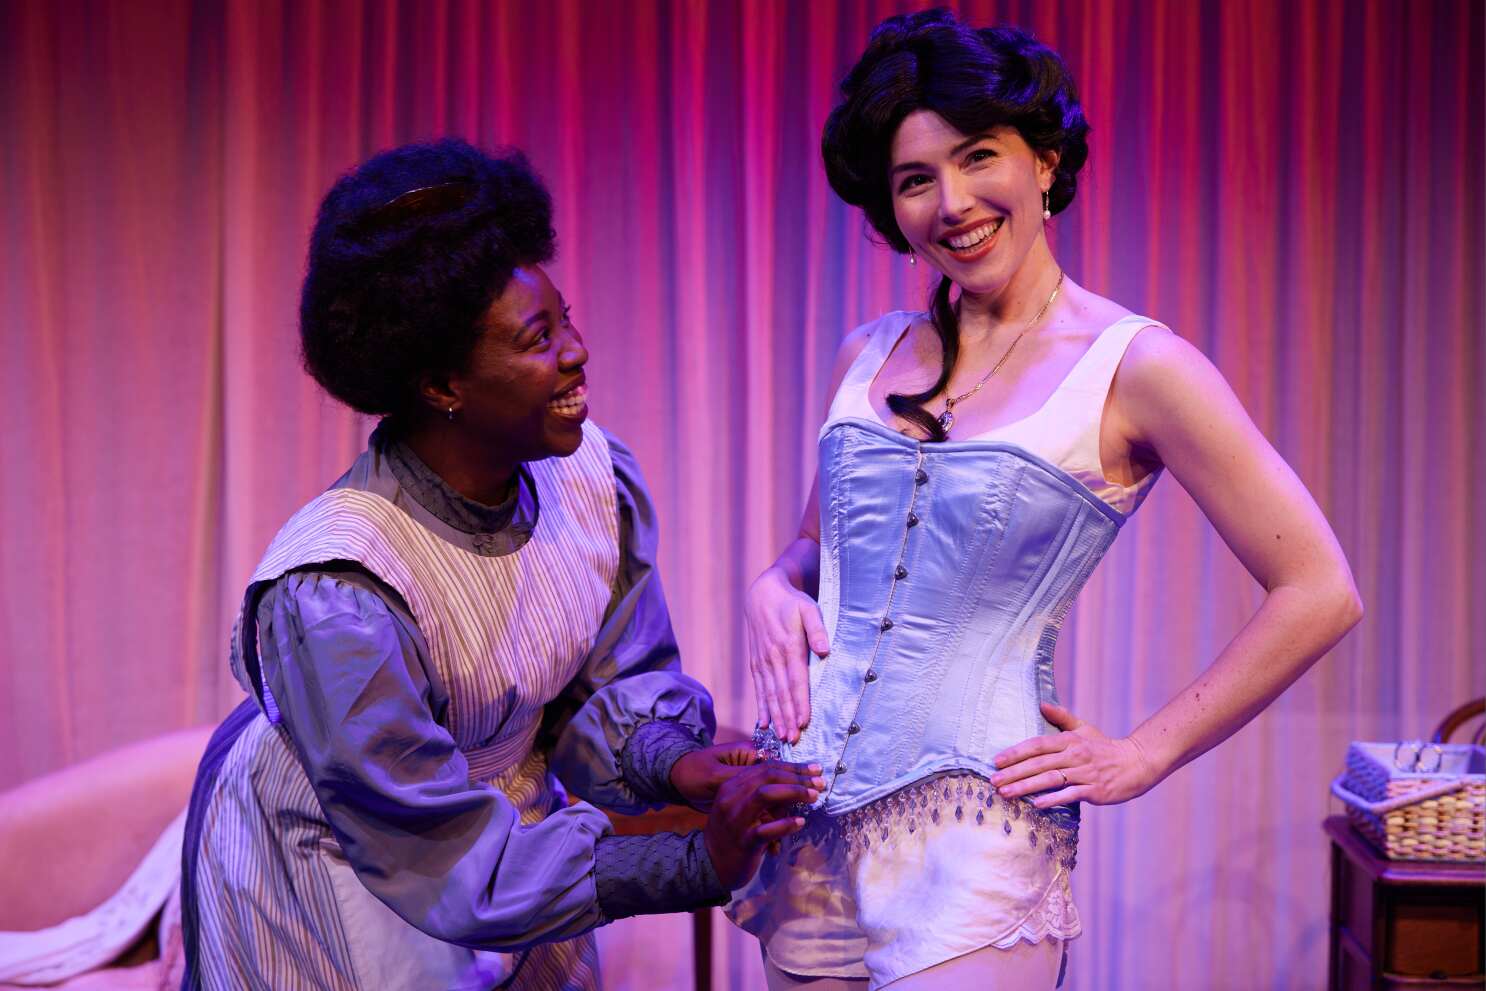 Intimate Apparel' review: a revealing romantic drama about finding